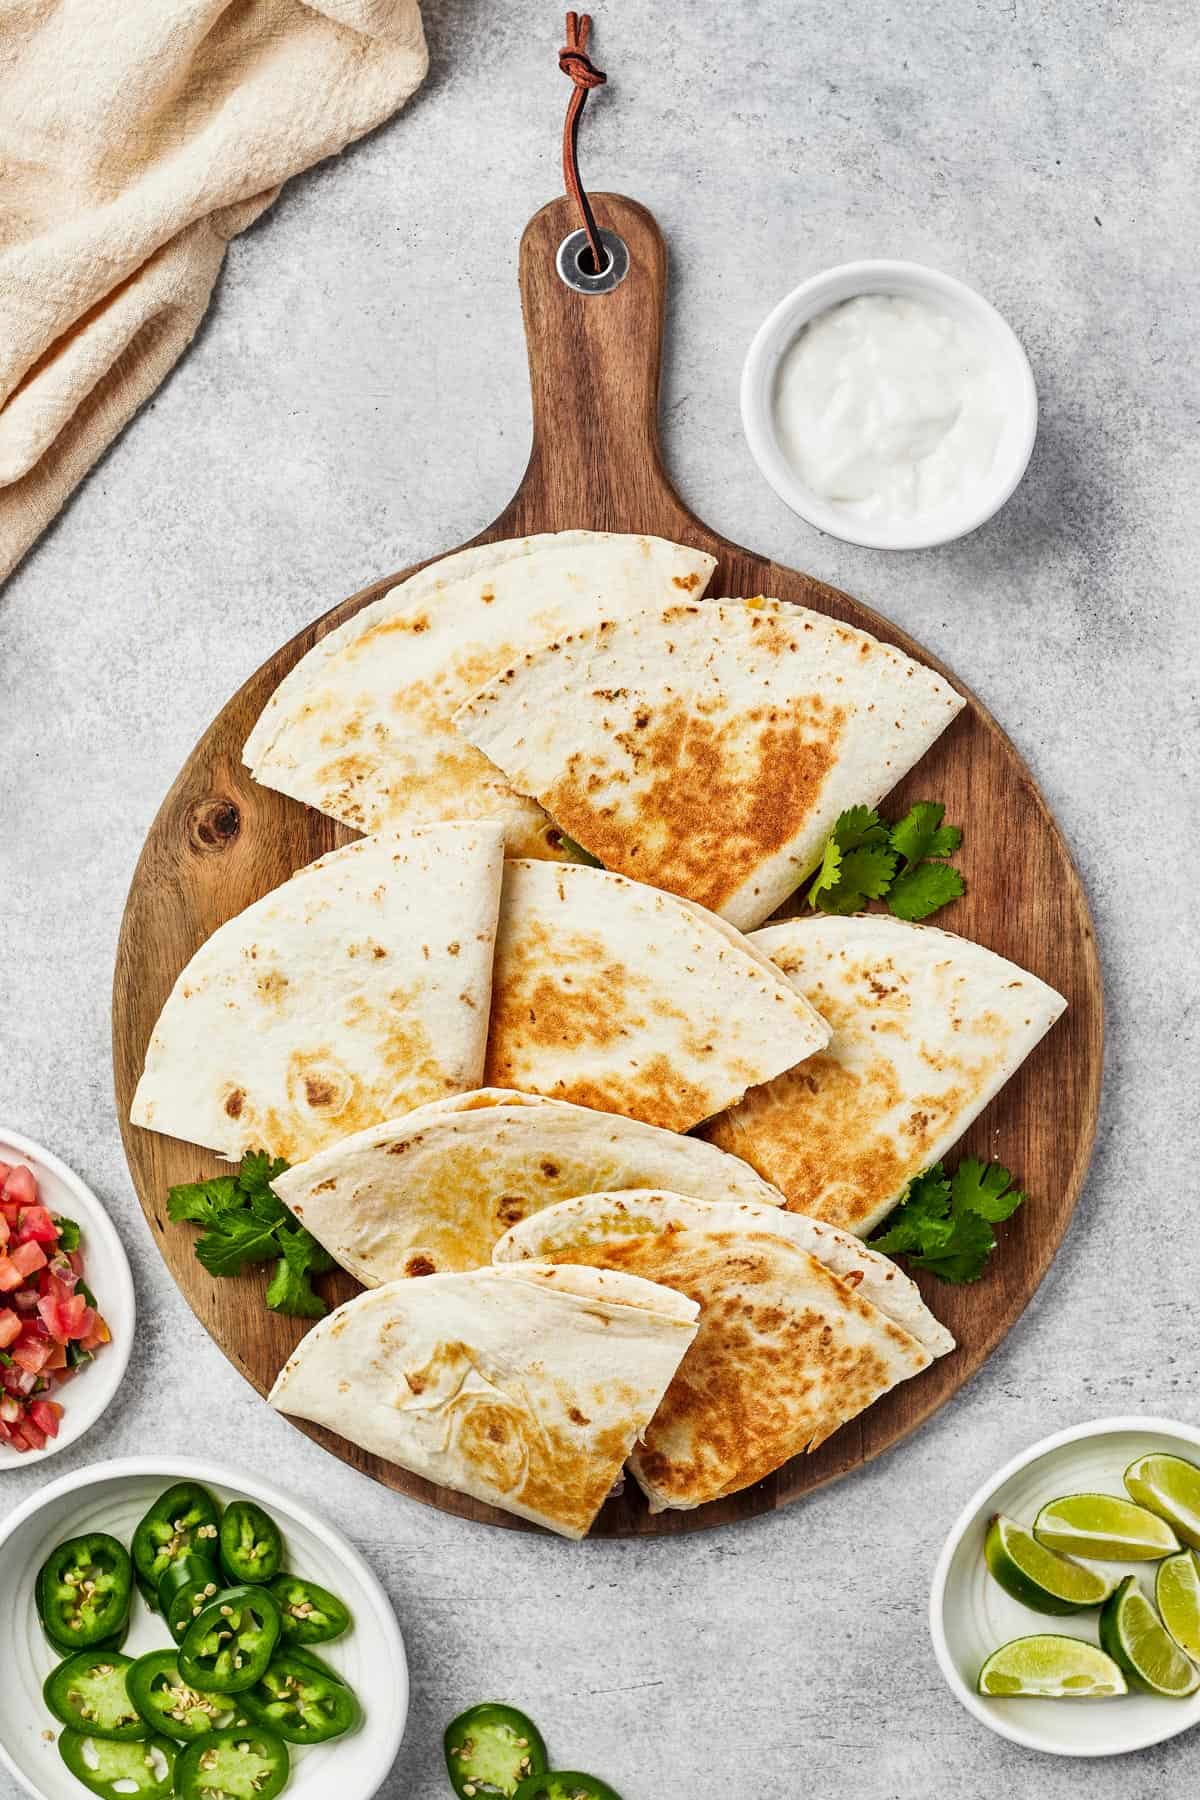 Tortilla wedges fanned out on a wooden board, with jalapeno garnish.